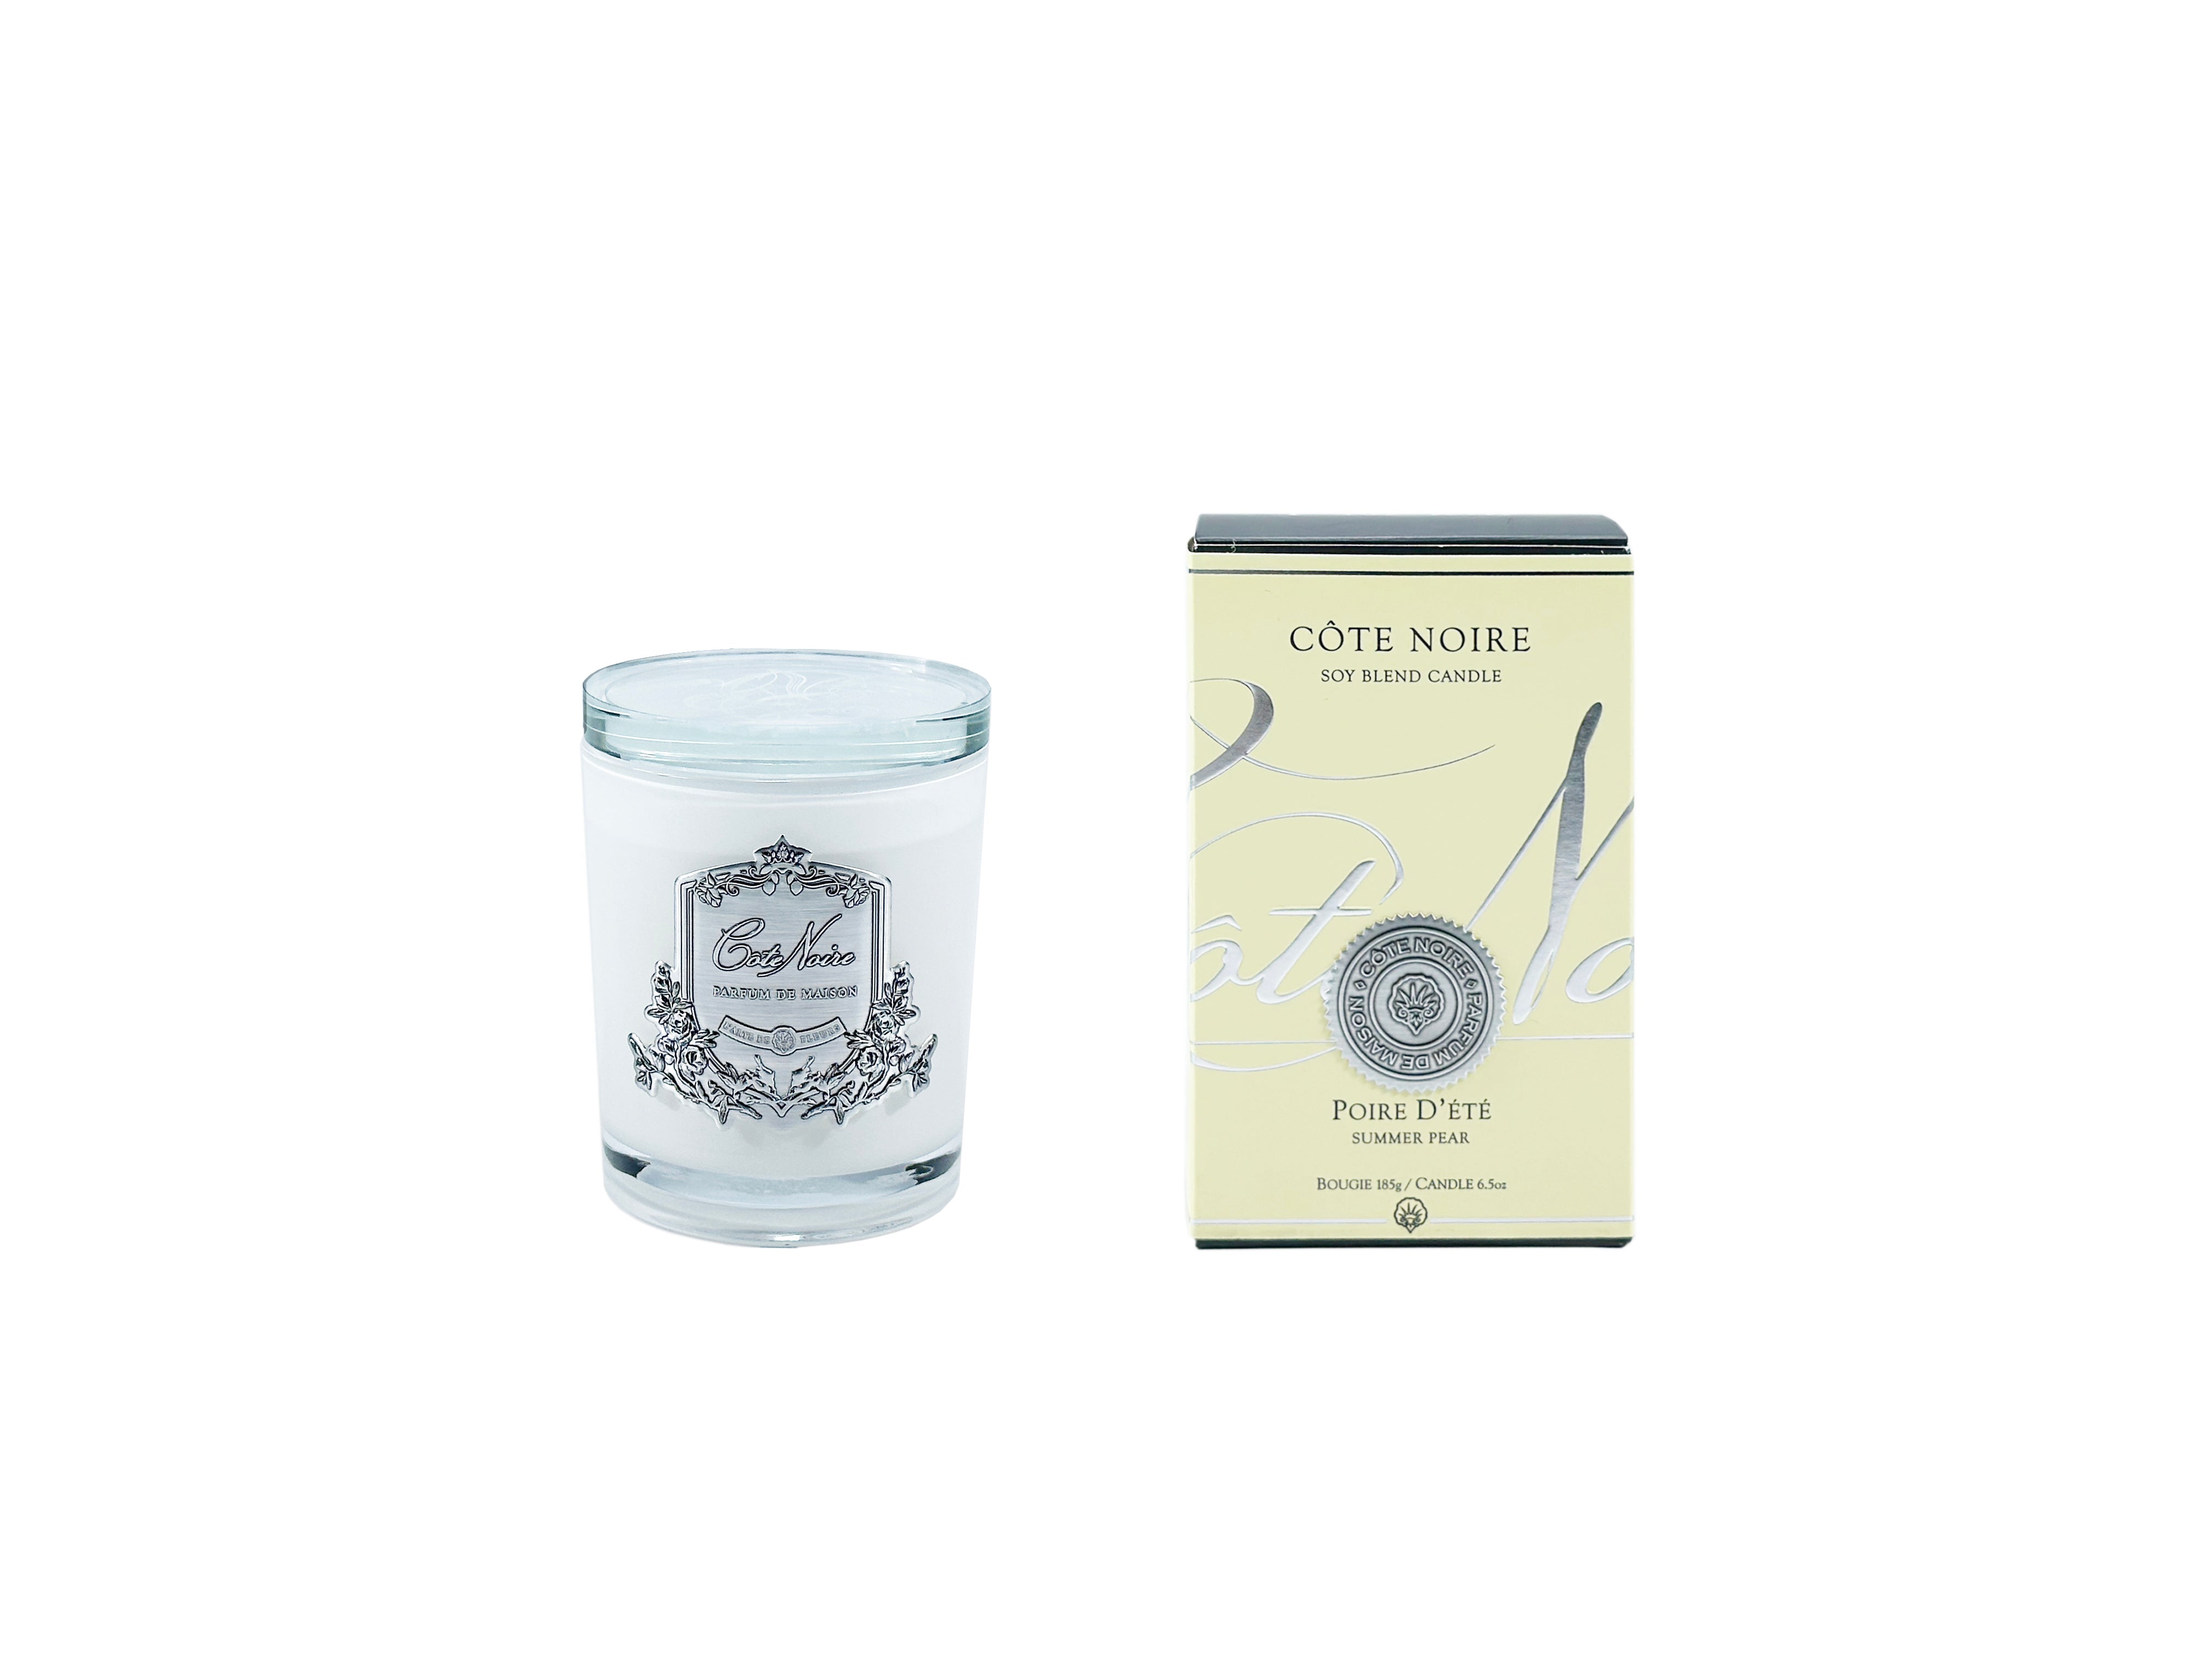 Cote Noire - Summer Pear - 185g Silver Candle